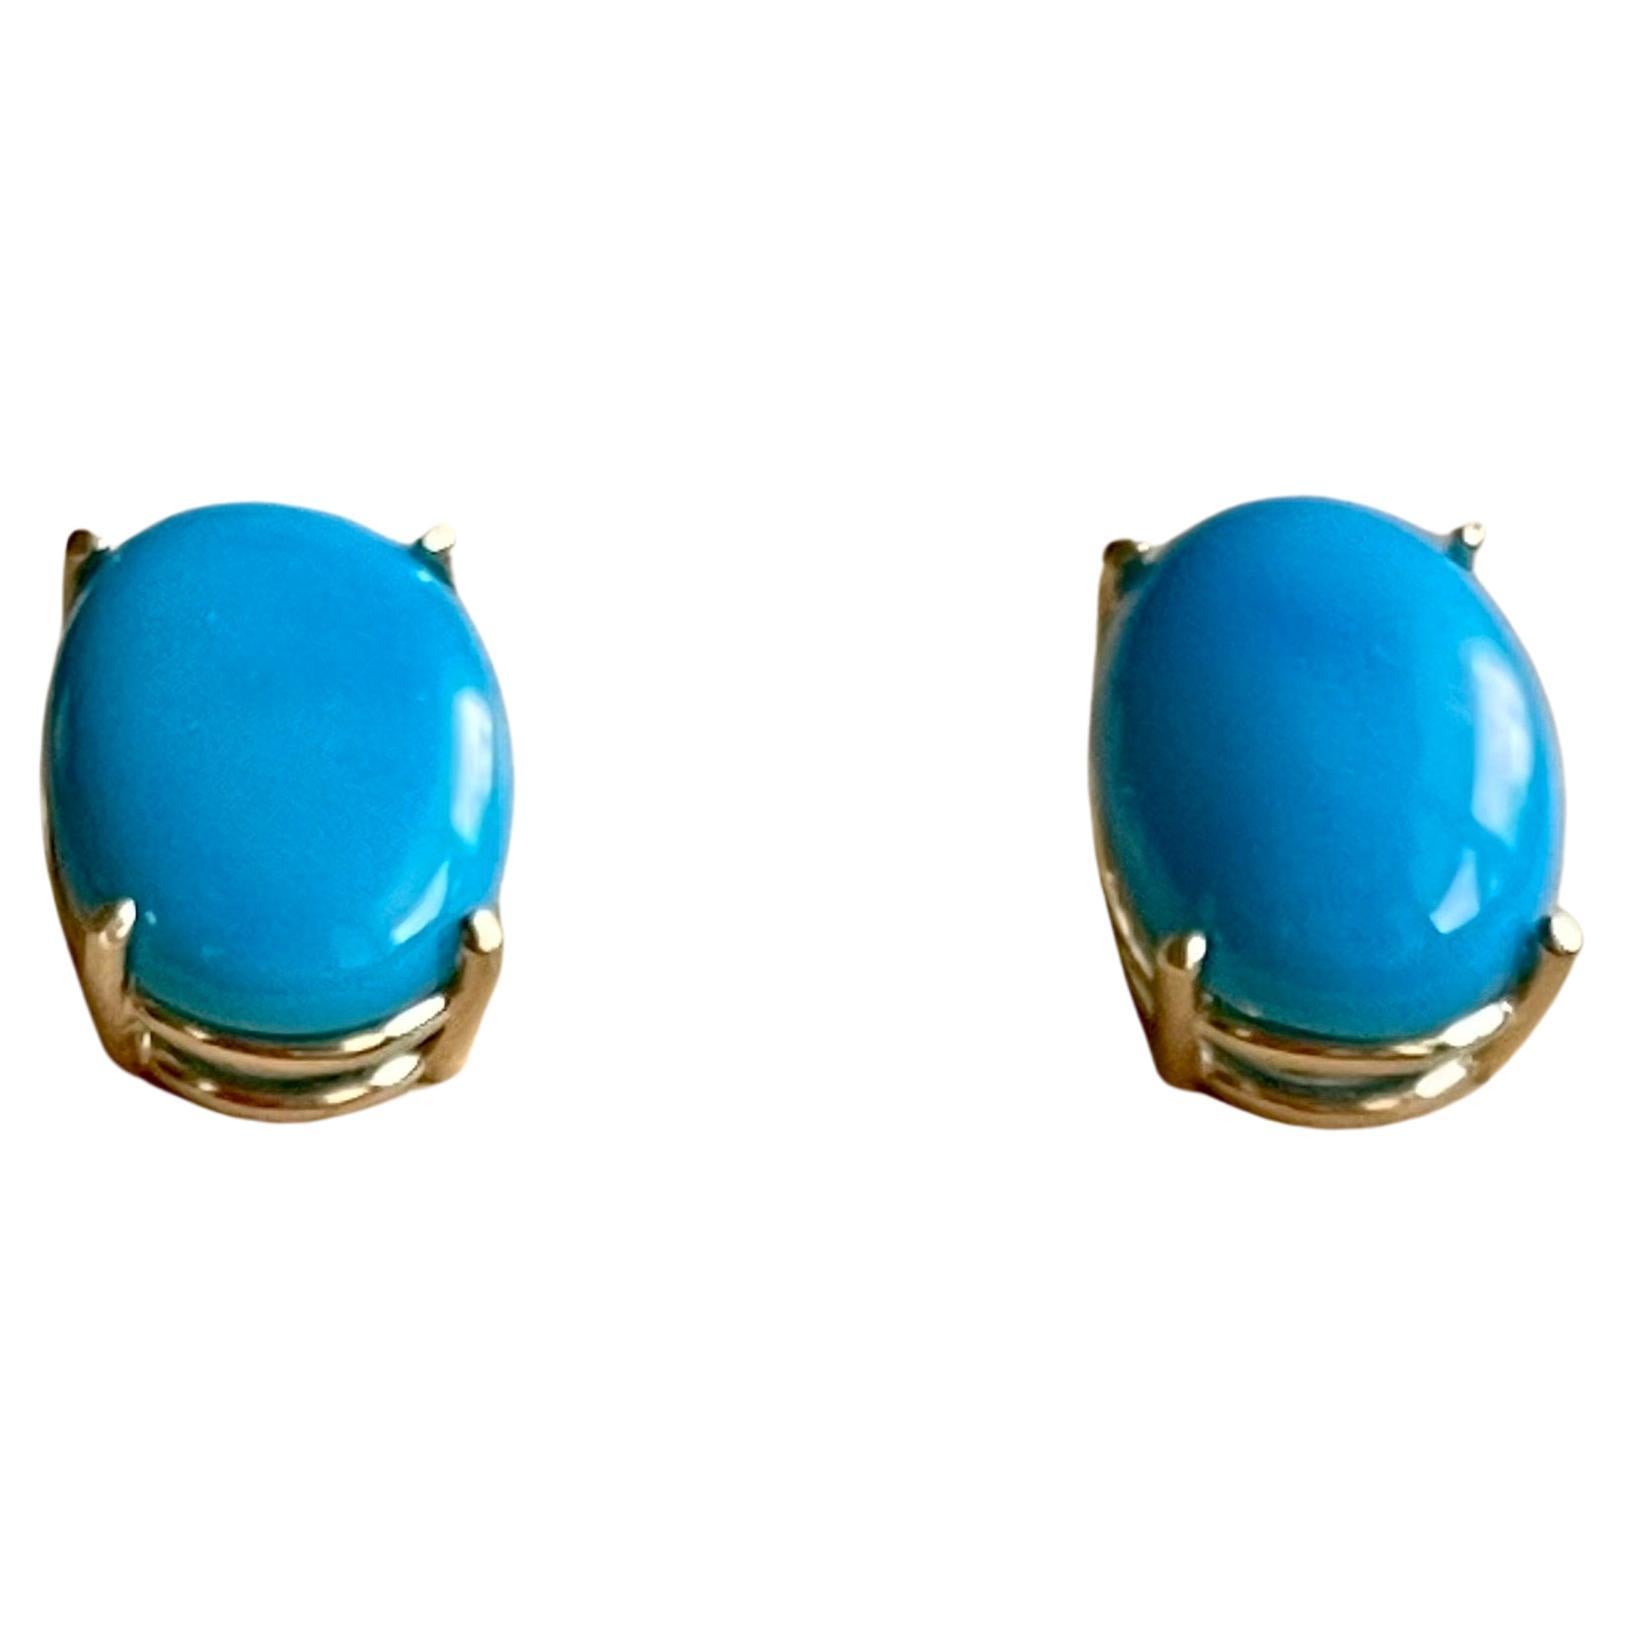 10 Ct Oval Natural Sleeping Beauty Turquoise Stud Earrings 14 K Yellow Gold For Sale